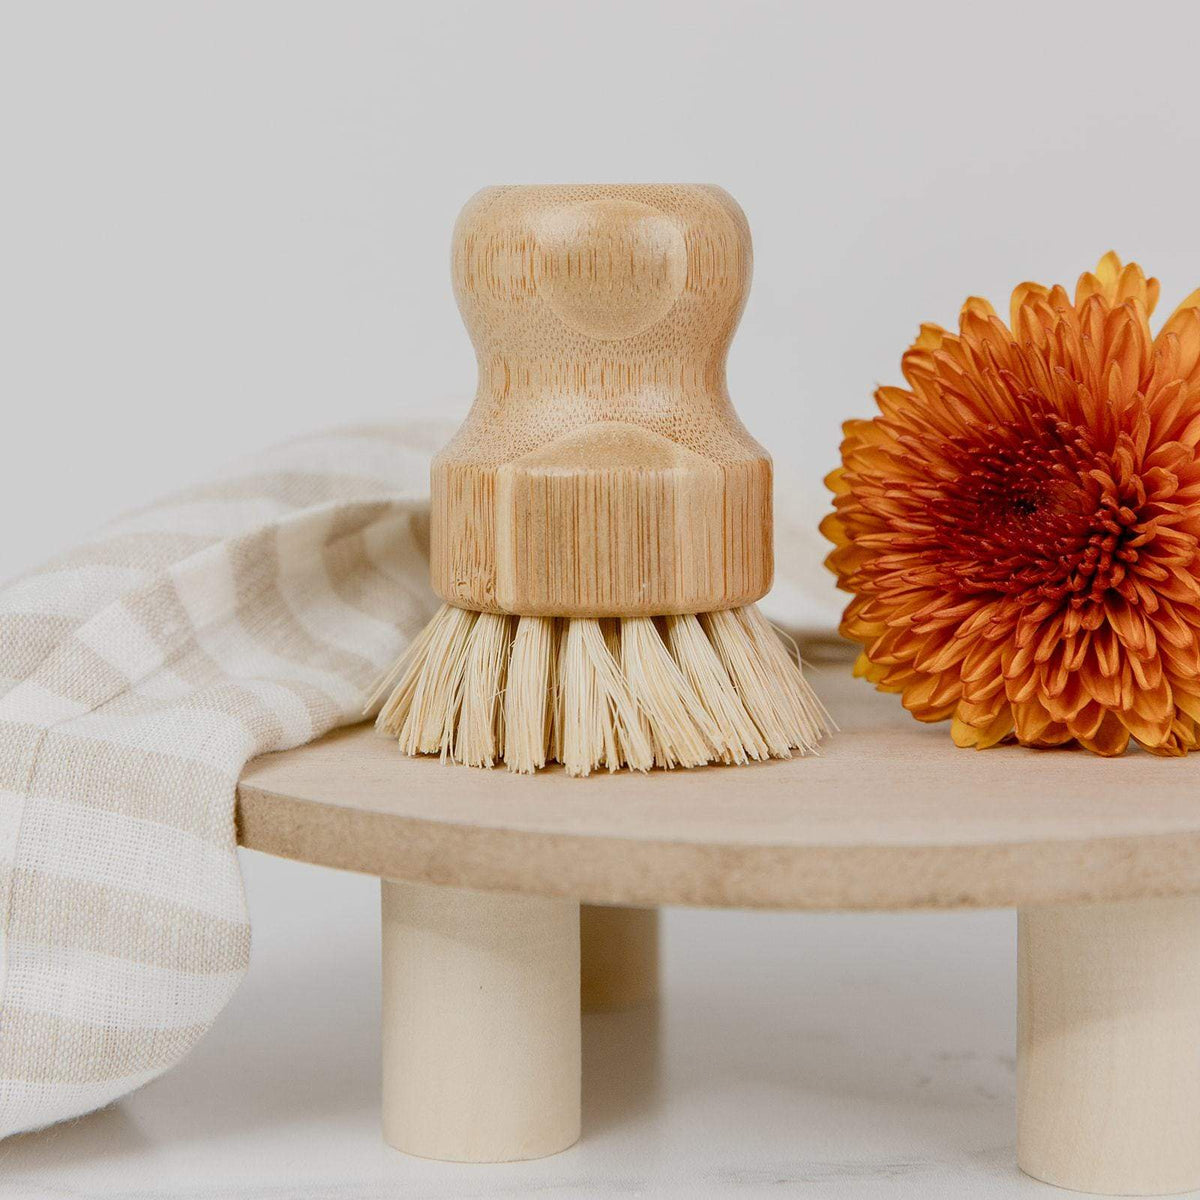 Bamboo Toilet Bowl Brush Cleaner and Stand | Bathroom | Cleaning Tools |  Sustainable | Eco Friendly | Compostable | All Natural | Zero Waste